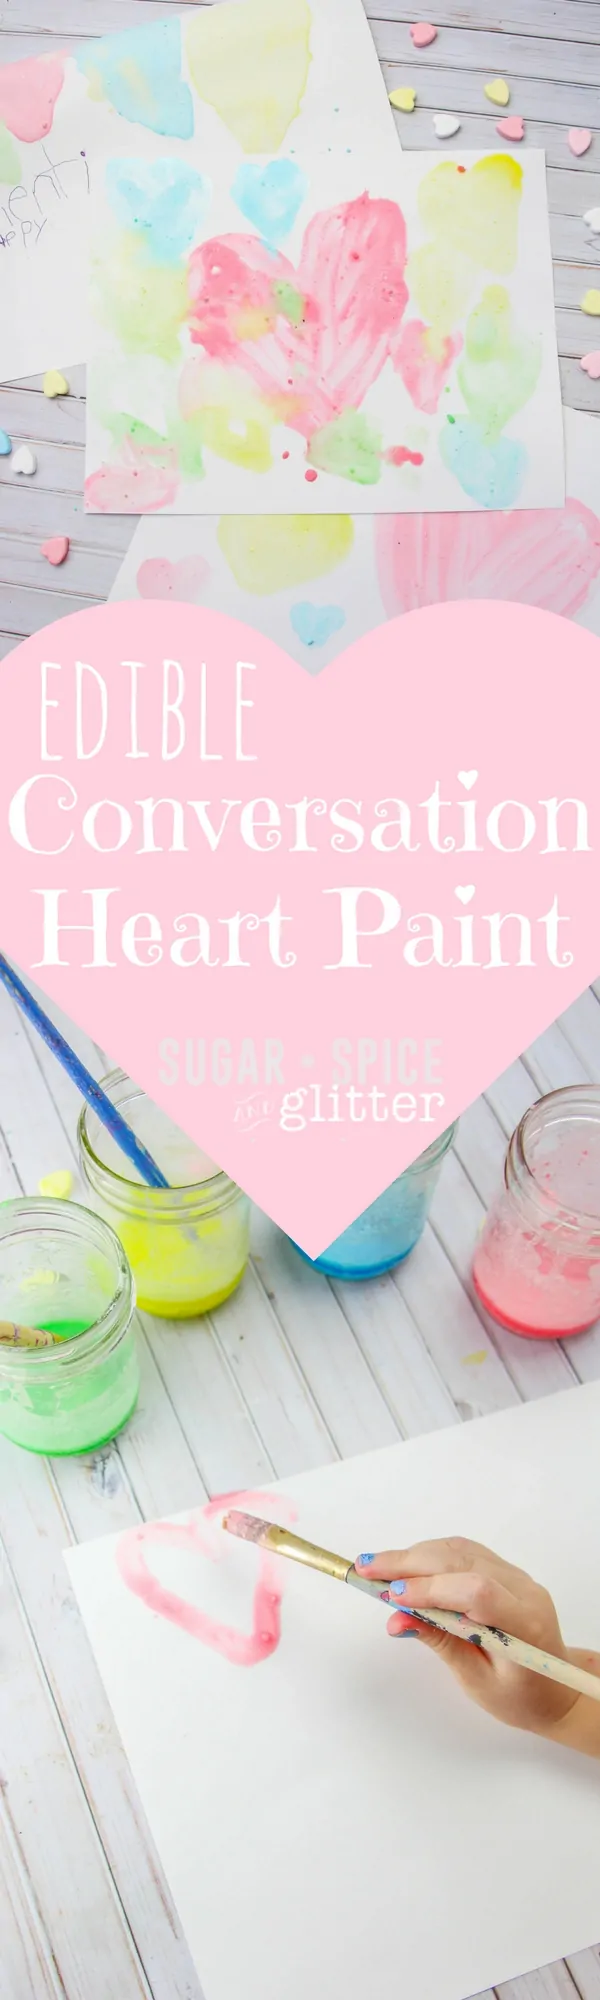 Edible Conversation Heart Paint - a homemade candy paint recipe is a great way to use up leftover conversation hearts and results in a glossy and yummy-scented paint. Perfect for Valentine's Day for kids